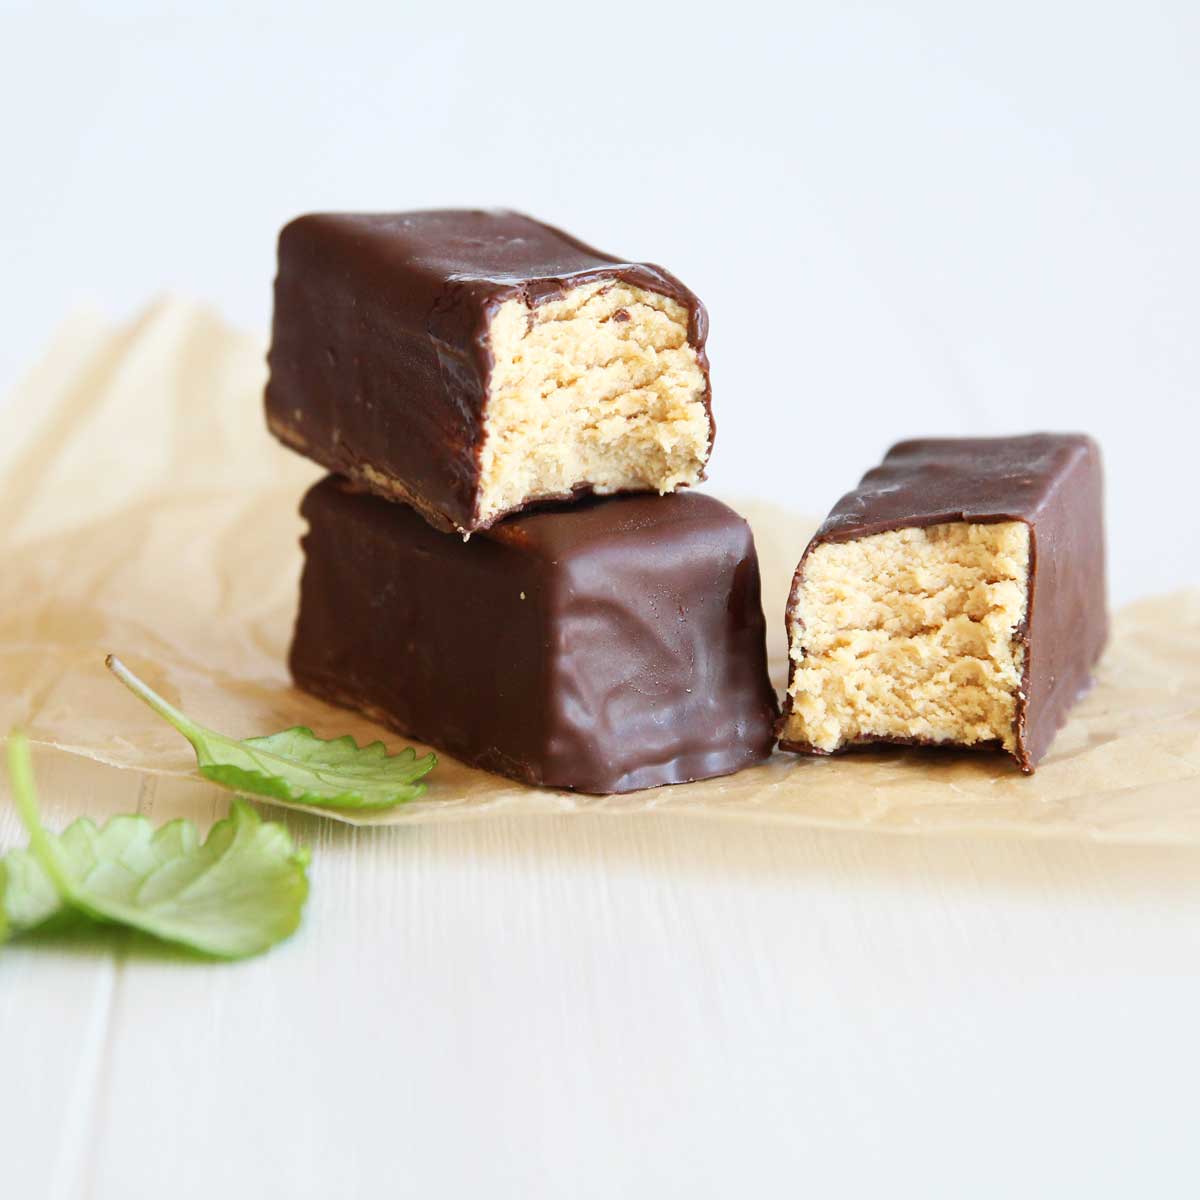 Simple Greek Yogurt Peanut Butter Protein Bars to eat for Breakfast or Post-Workout - Almond Joy Protein Bars